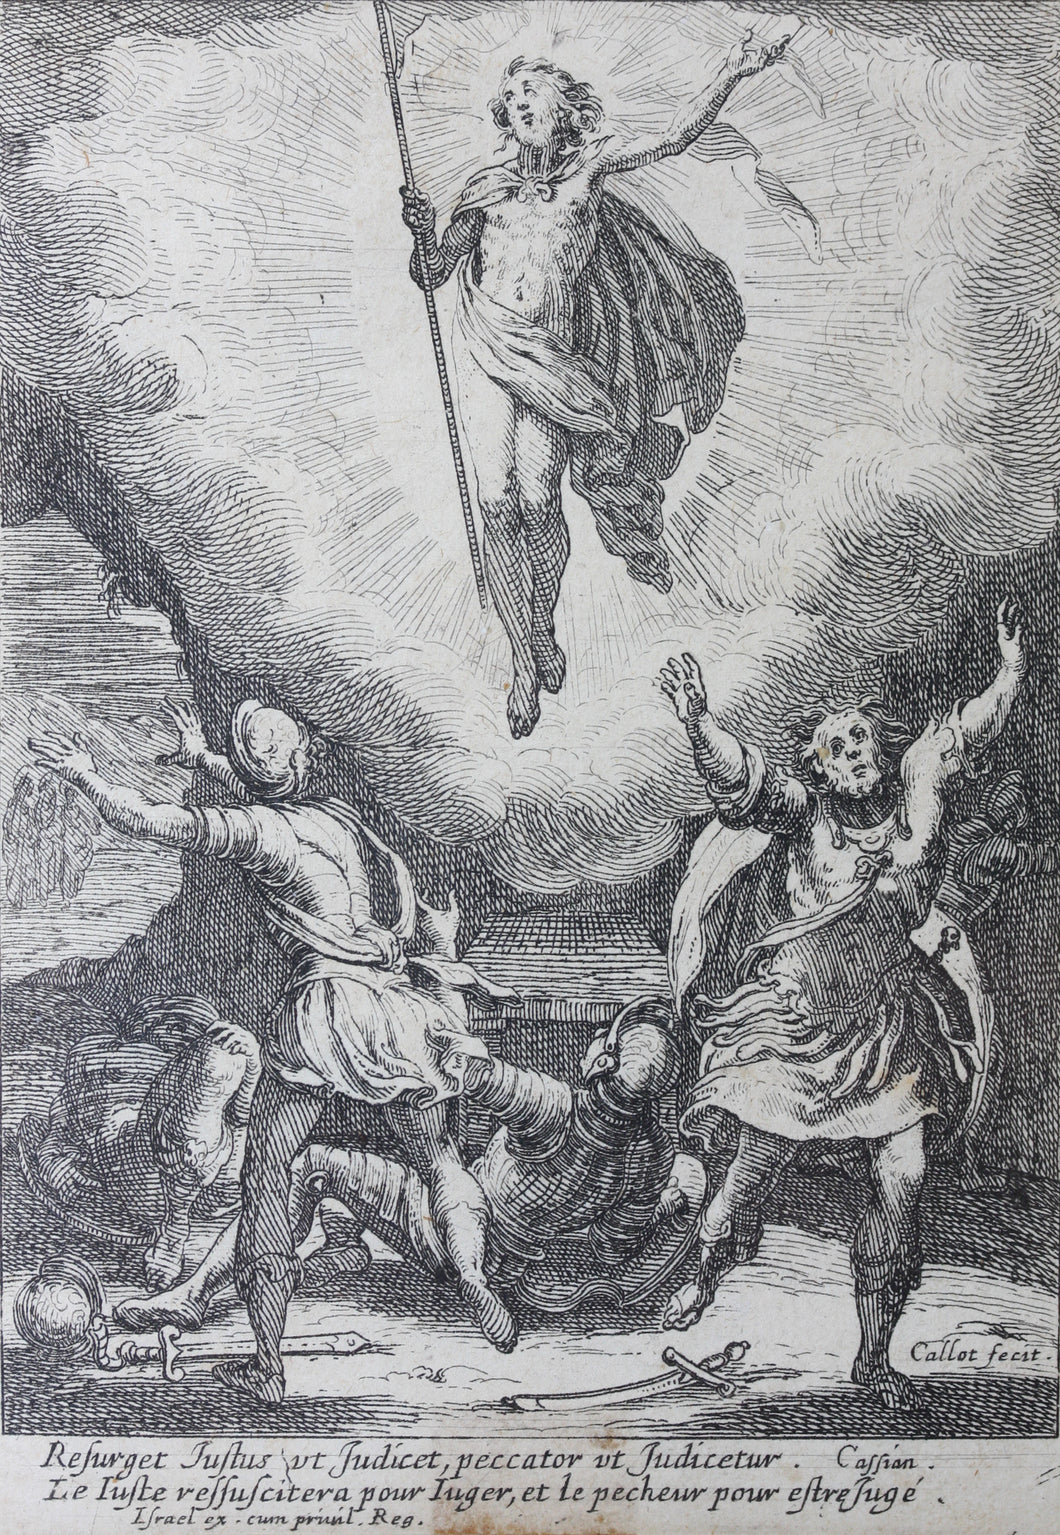 Jacques Callot. Resurrection of Christ. Etching. c. 1621-1635.